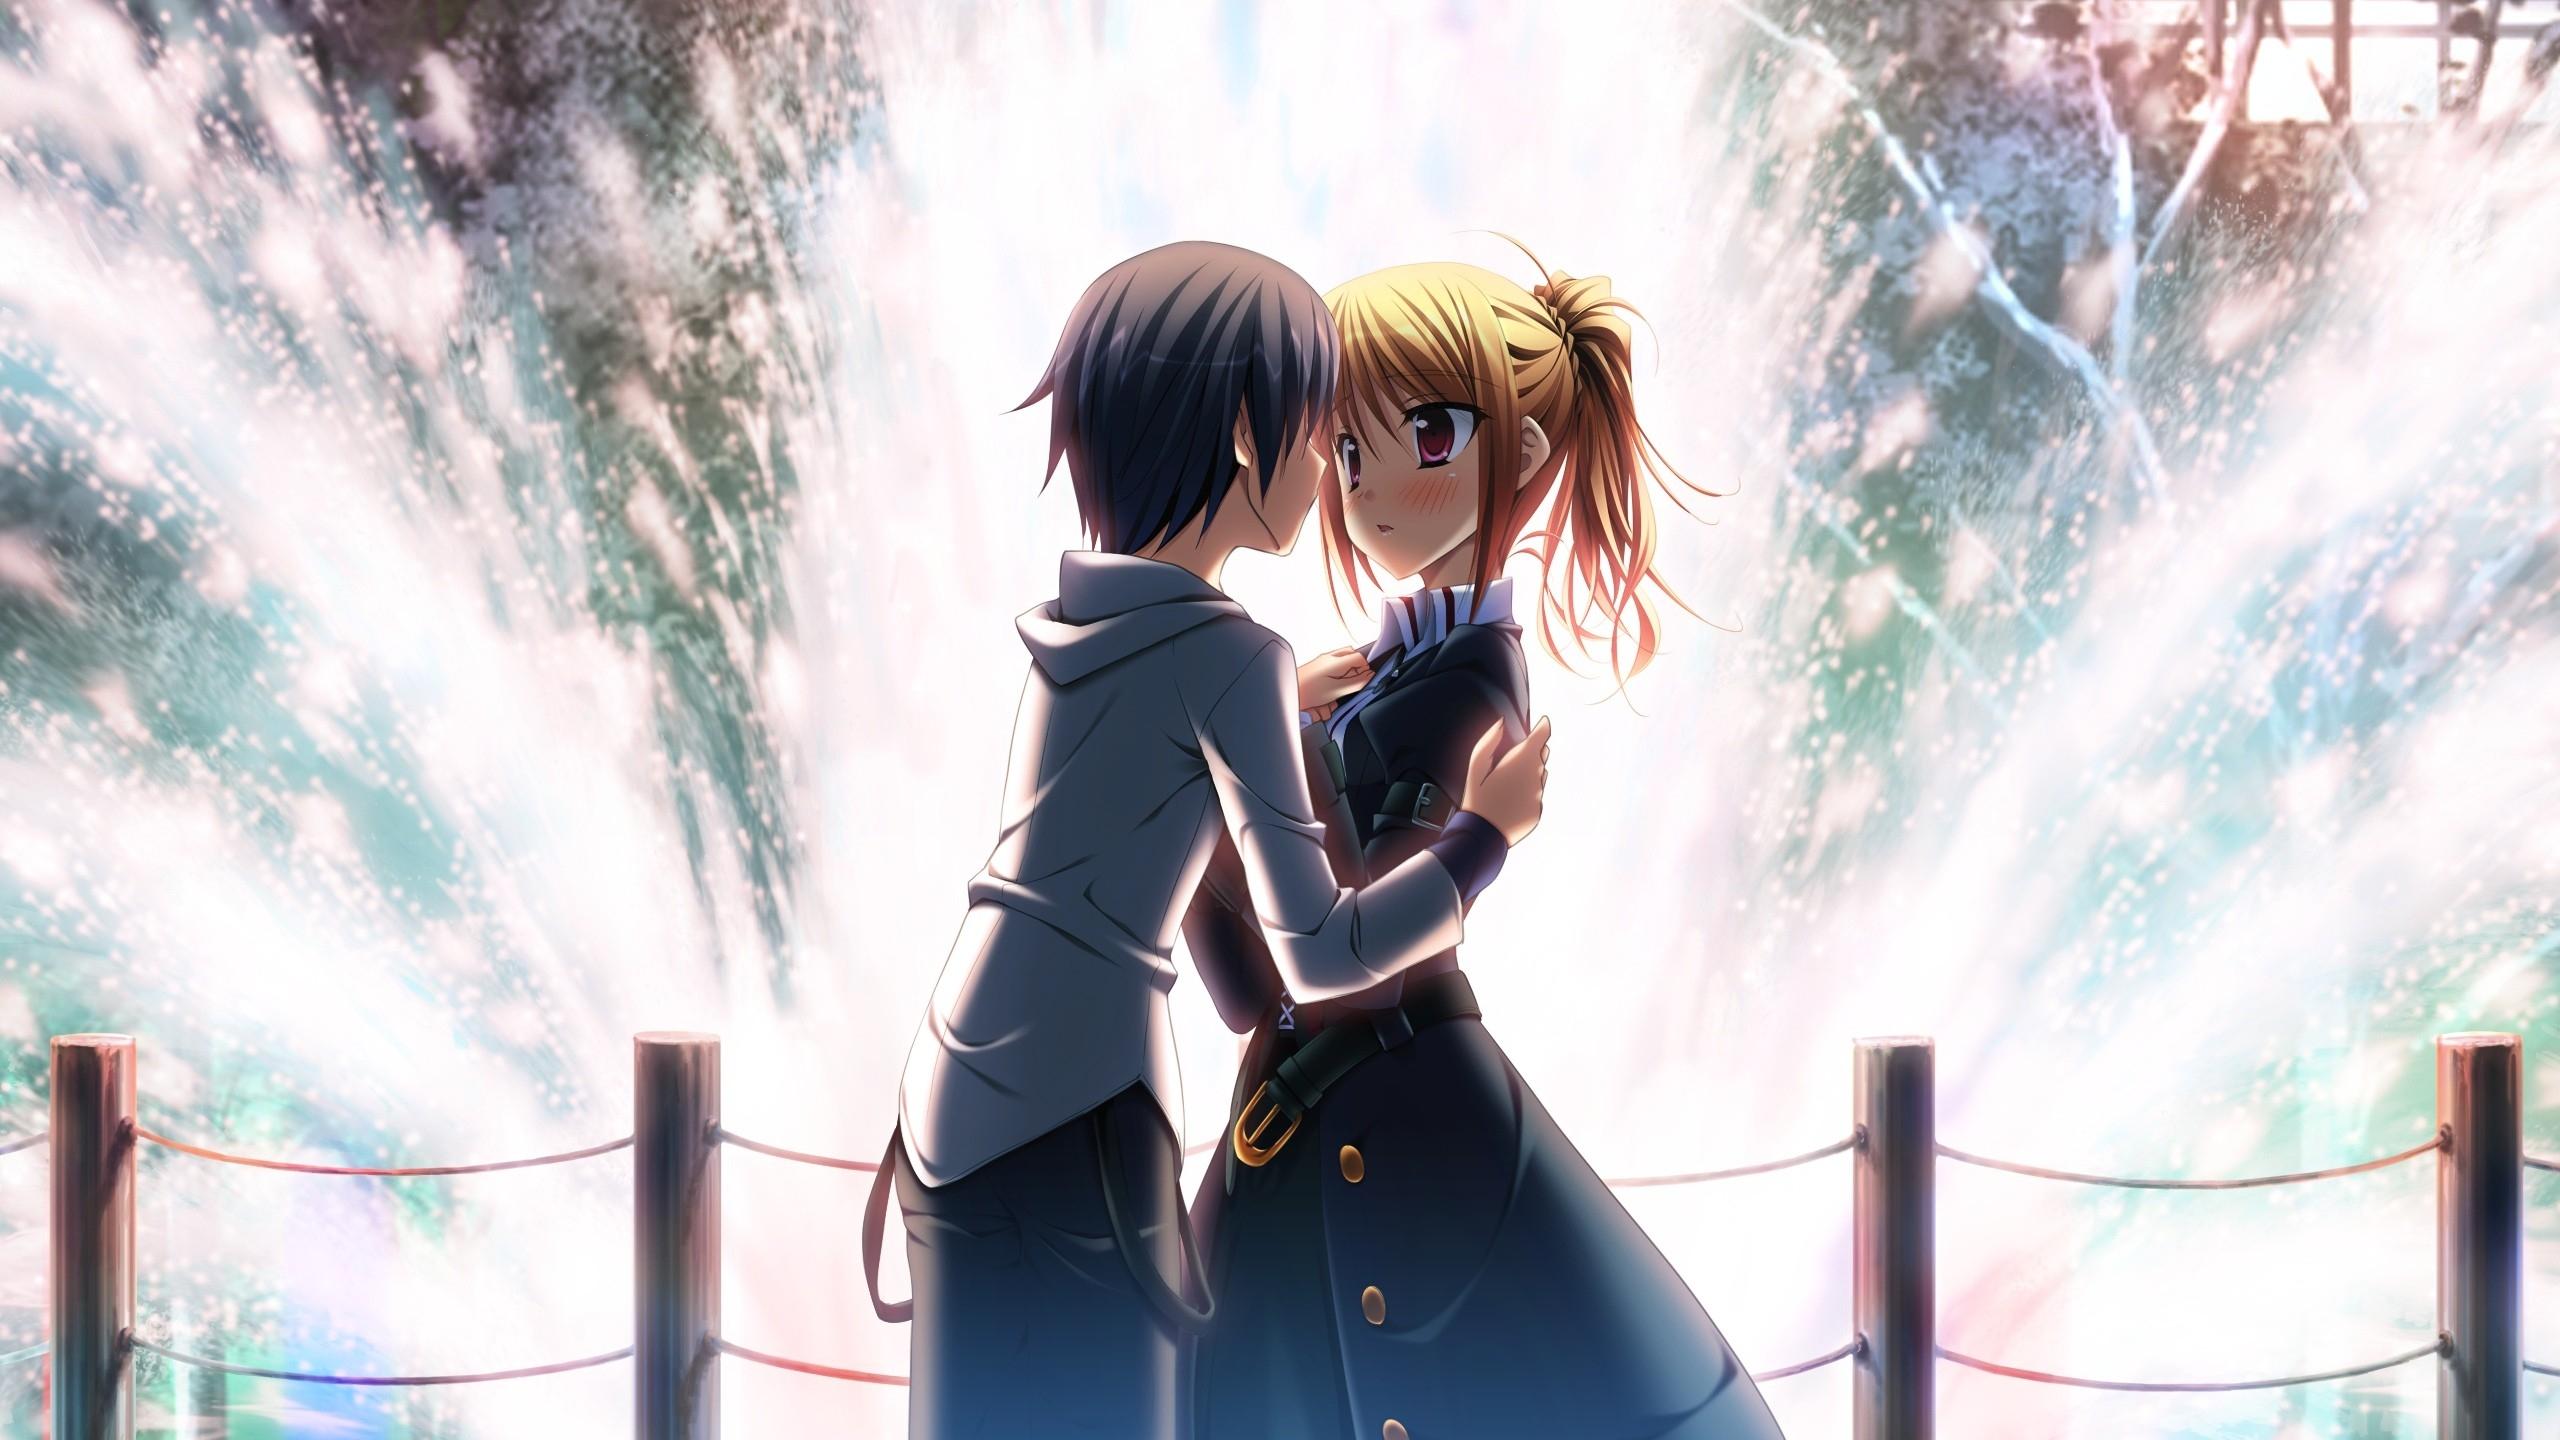 Love Couples Hd Anime Wallpapers Wallpaper Cave